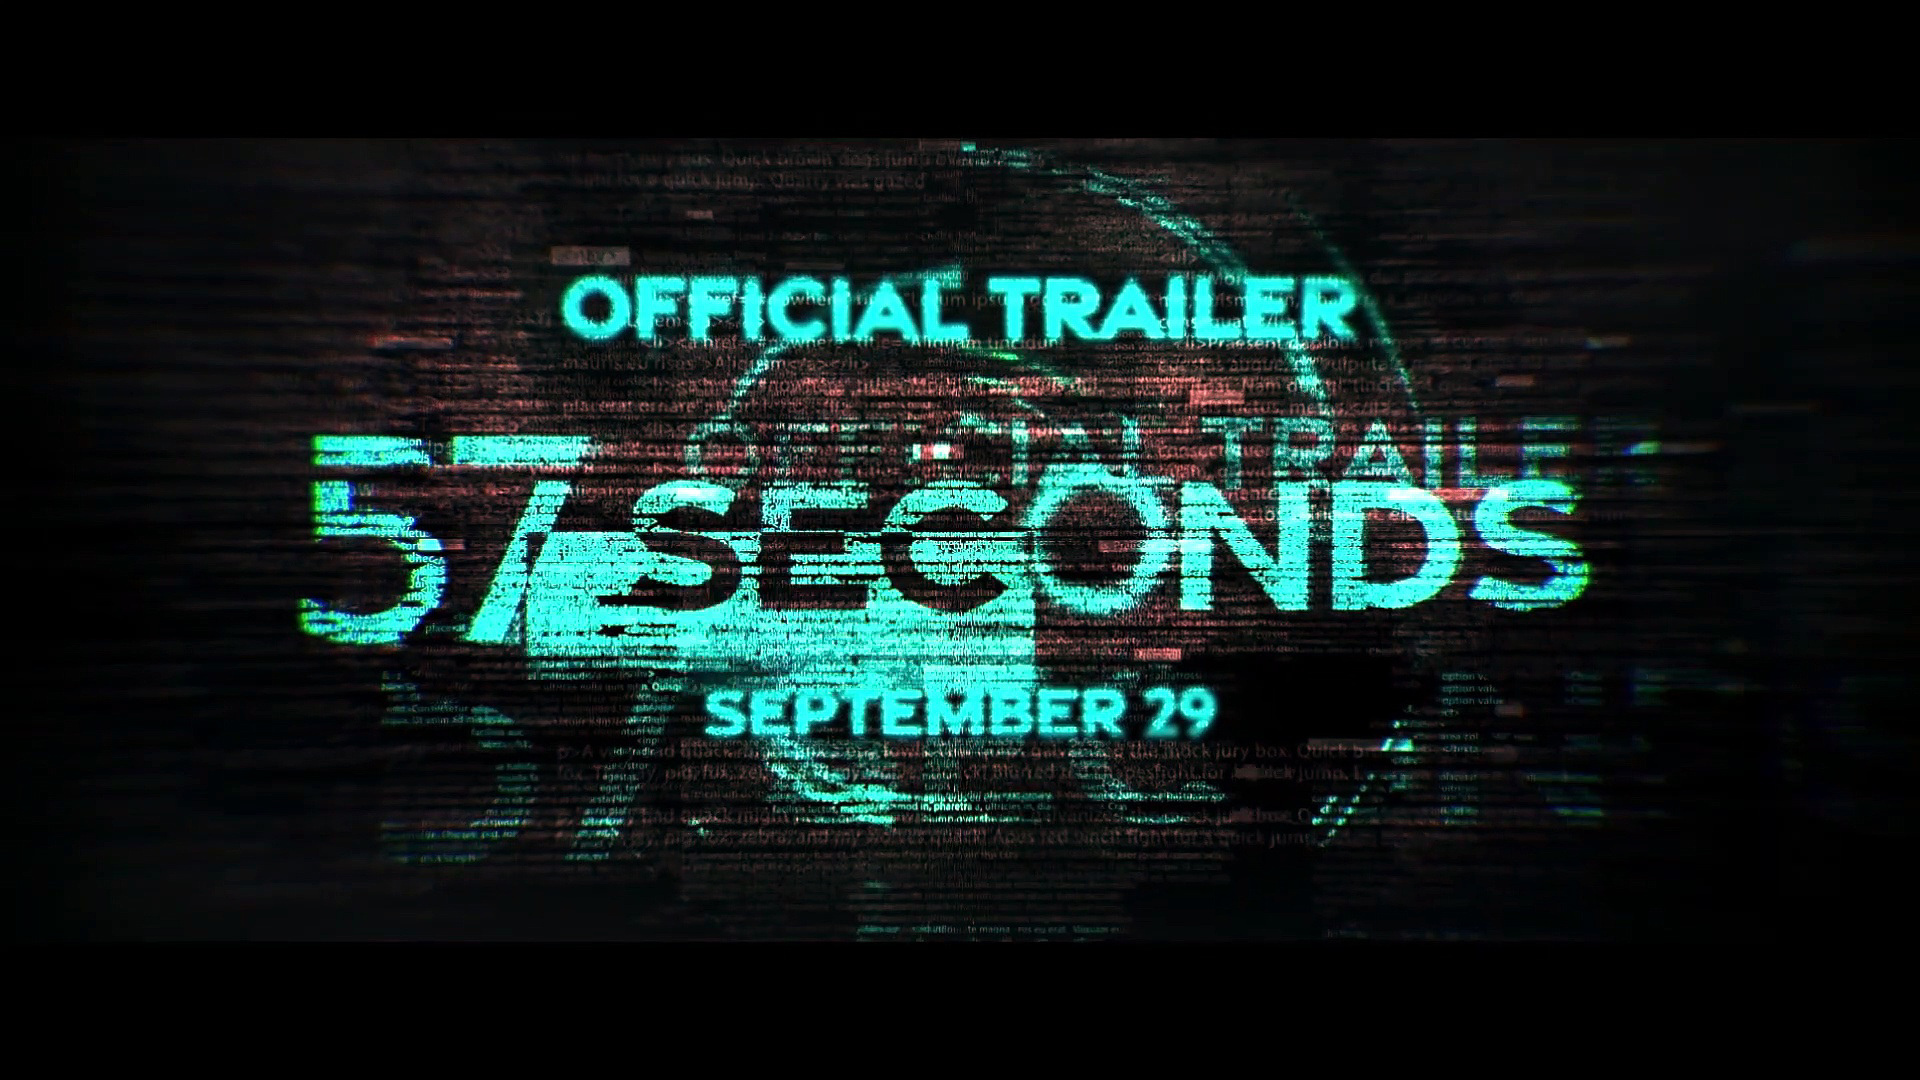 movie review 57 seconds